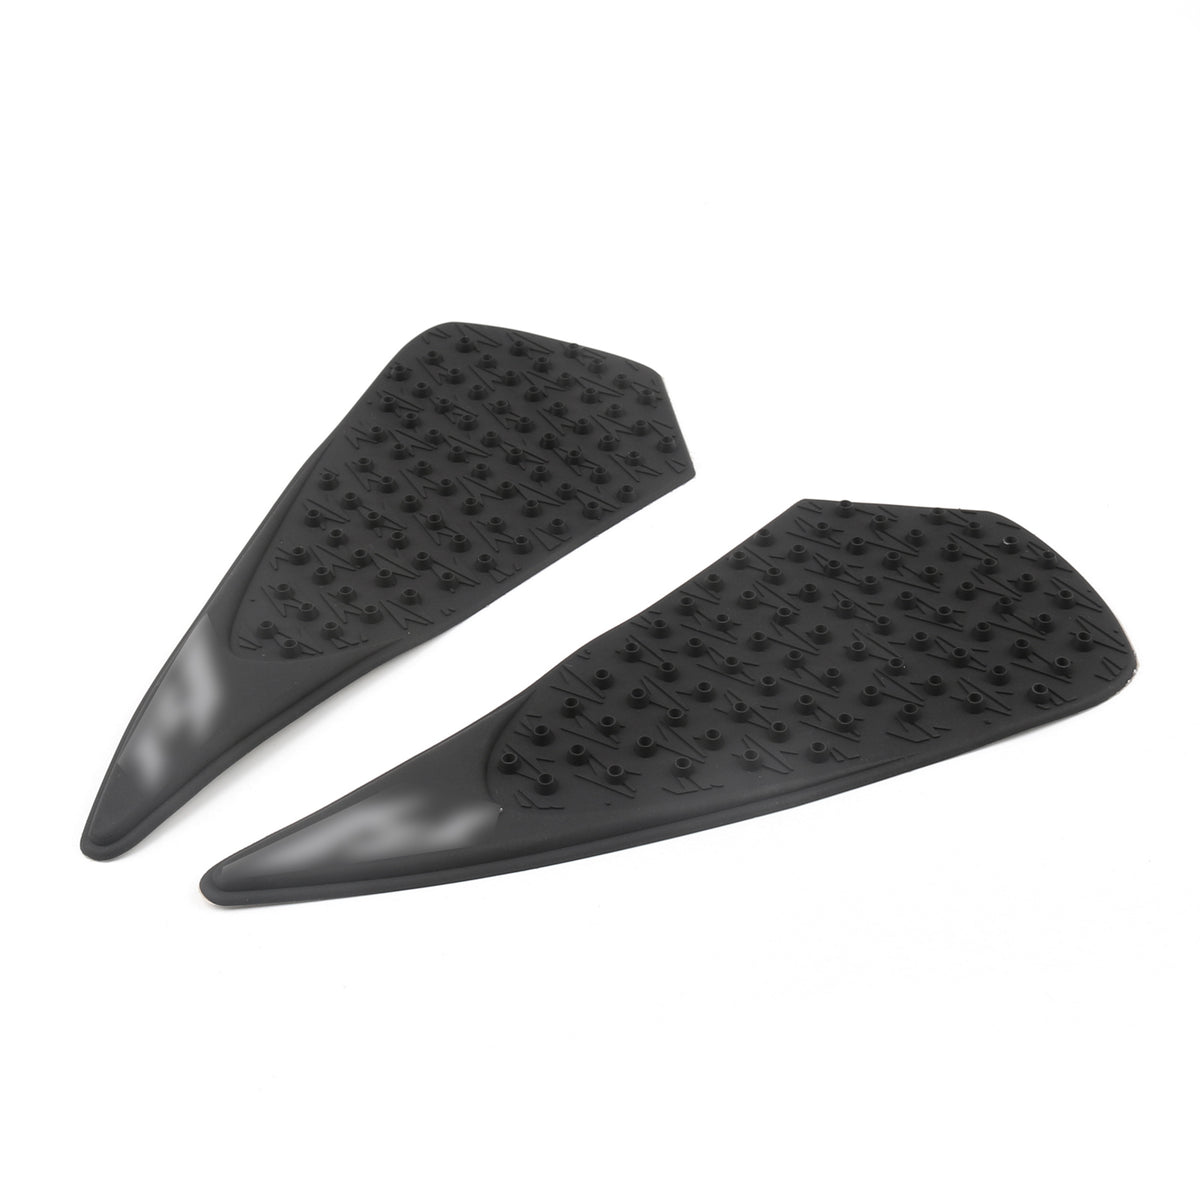 Yamaha Side Tank Traction Grips Pads Protector Fit für YZF-R1 YZF R1 2004-2006 Schwarz